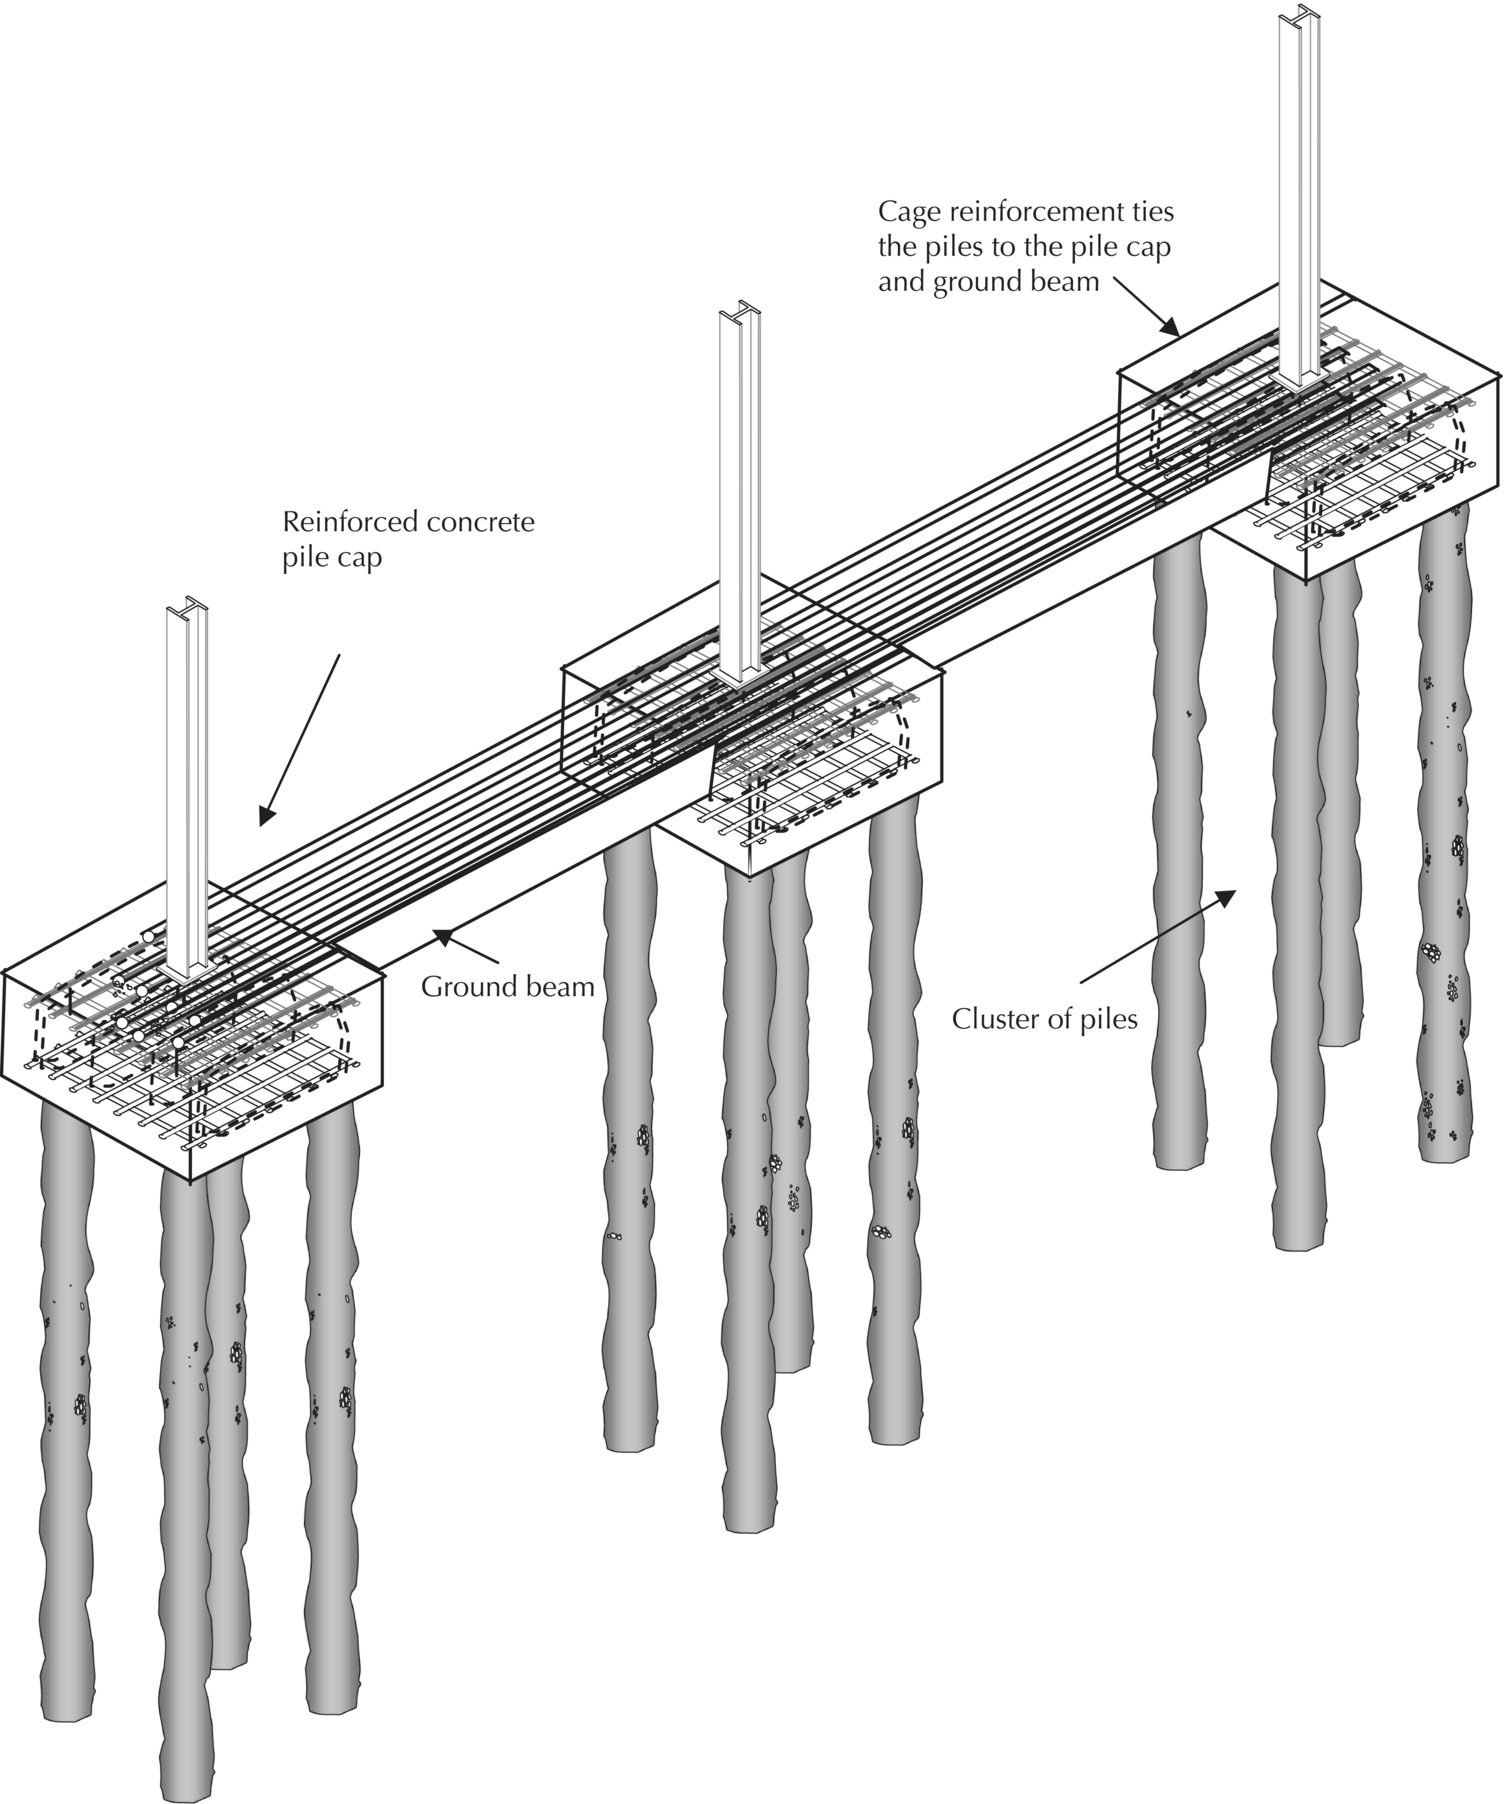 Illustration of pile foundation and pile caps with arrows depicting reinforced concrete pile cap, ground beam, cluster of piles, and cage reinforcement ties the piles to the pile cap and ground beam.